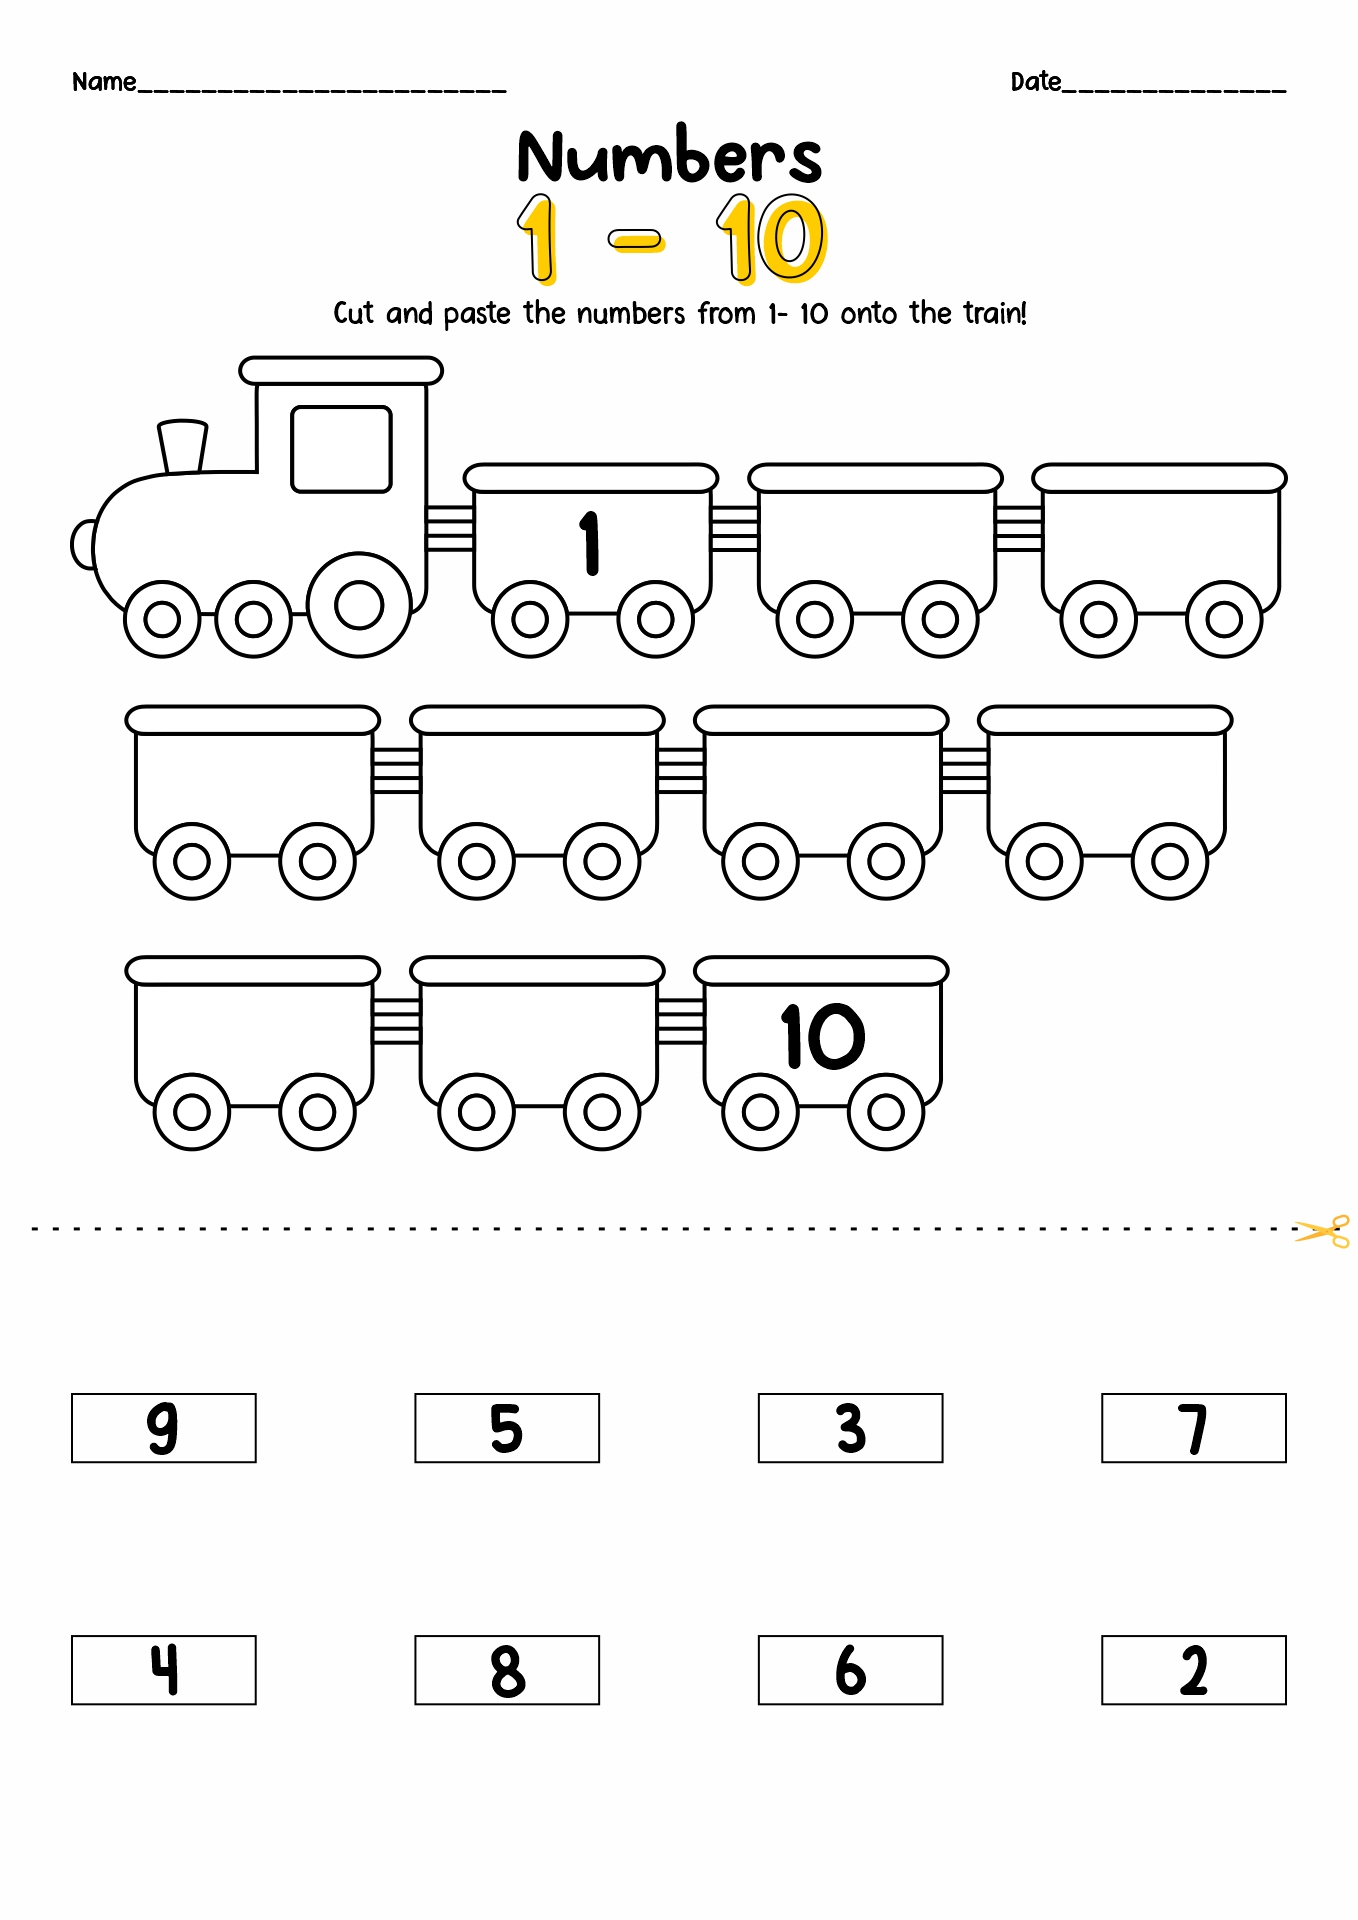 14-best-images-of-number-cut-out-worksheet-free-preschool-cut-and